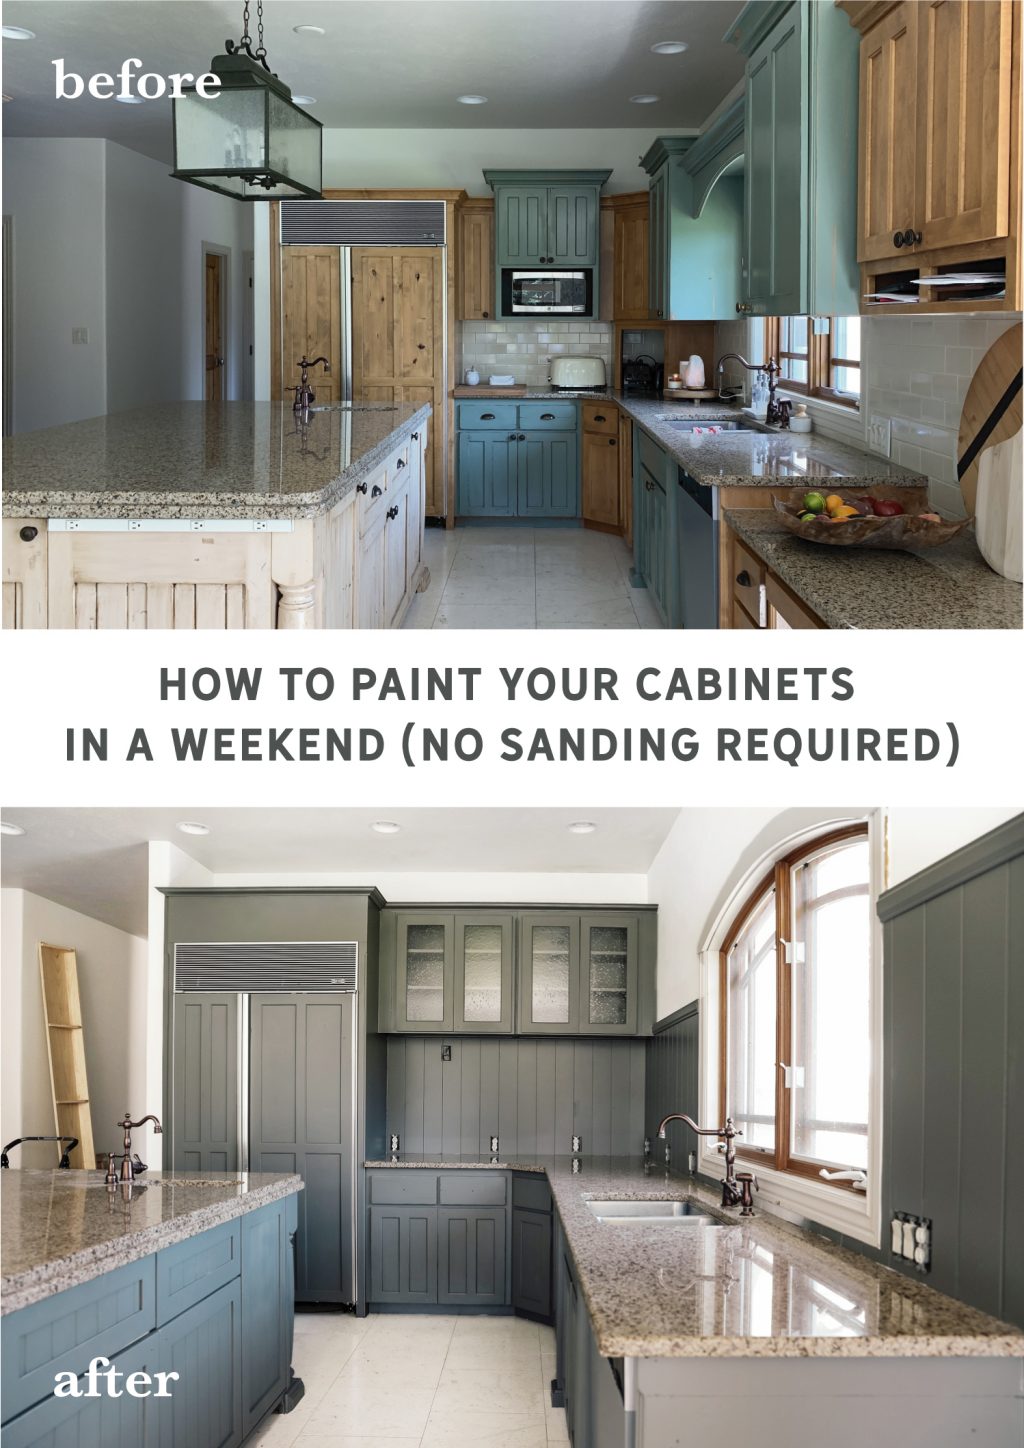 How To Paint Your Cabinets In A Weekend Without Sanding Them Chris Loves Julia